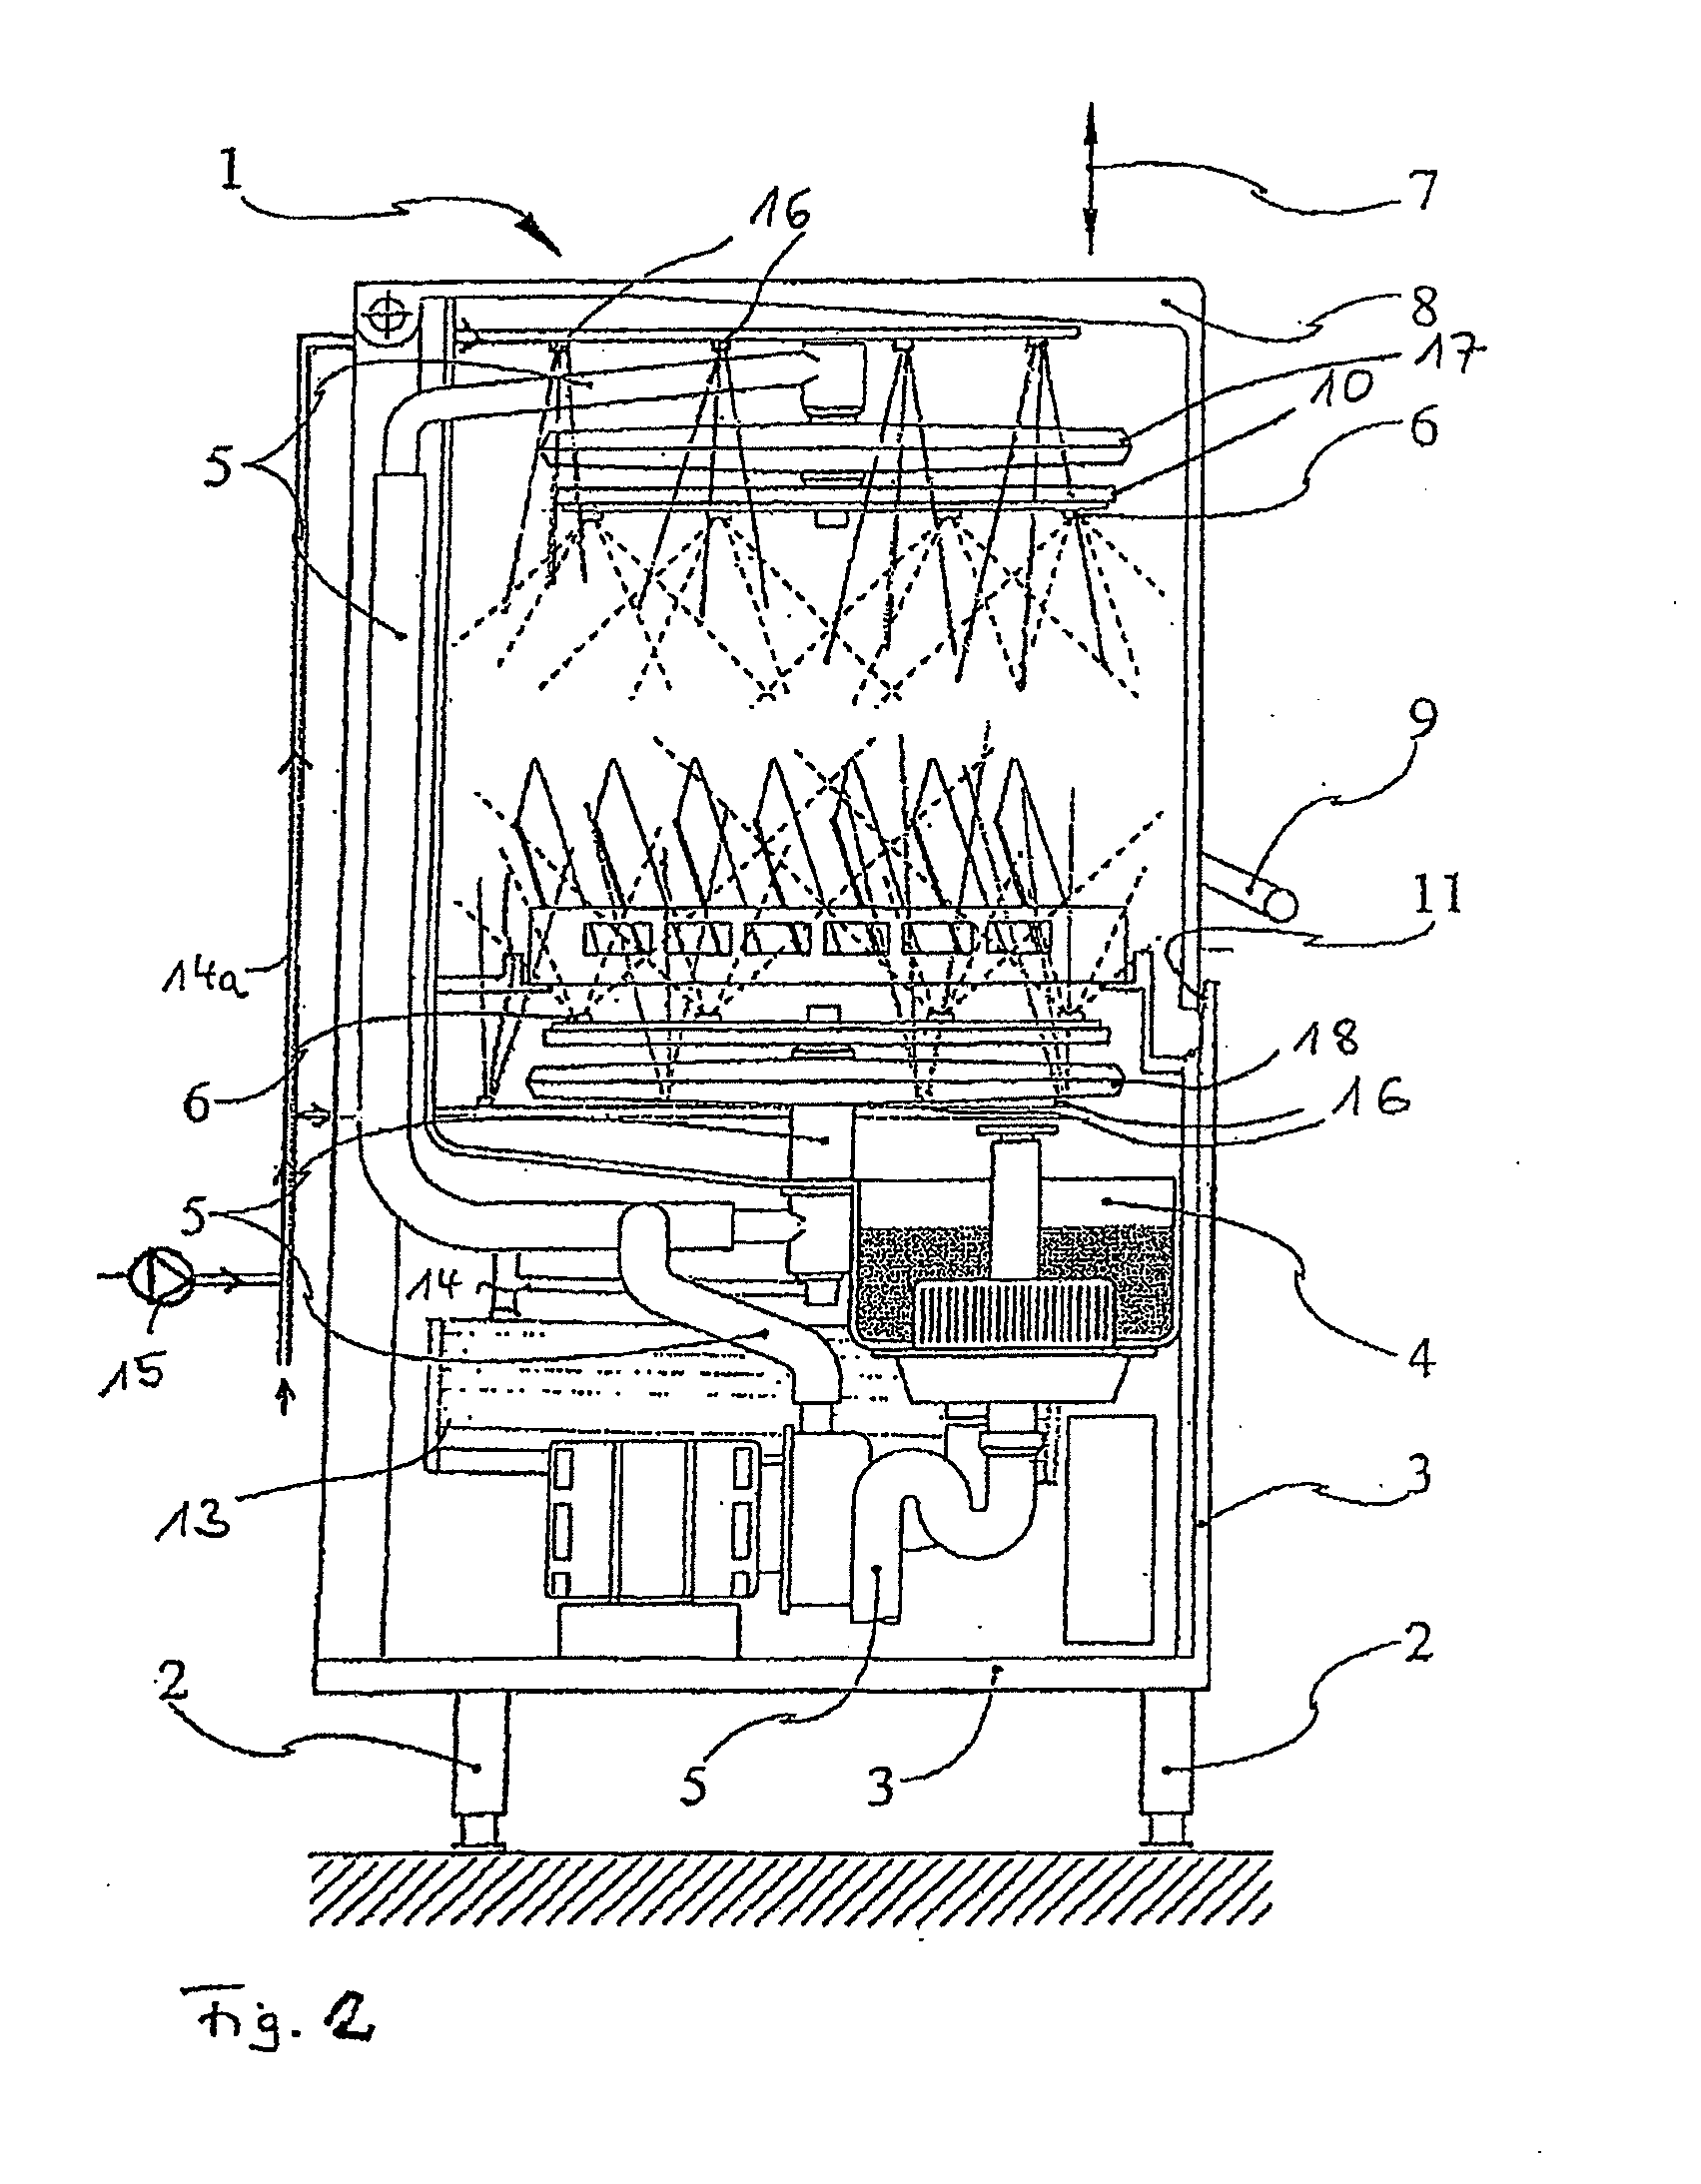 Concentrated warewashing compositions and methods